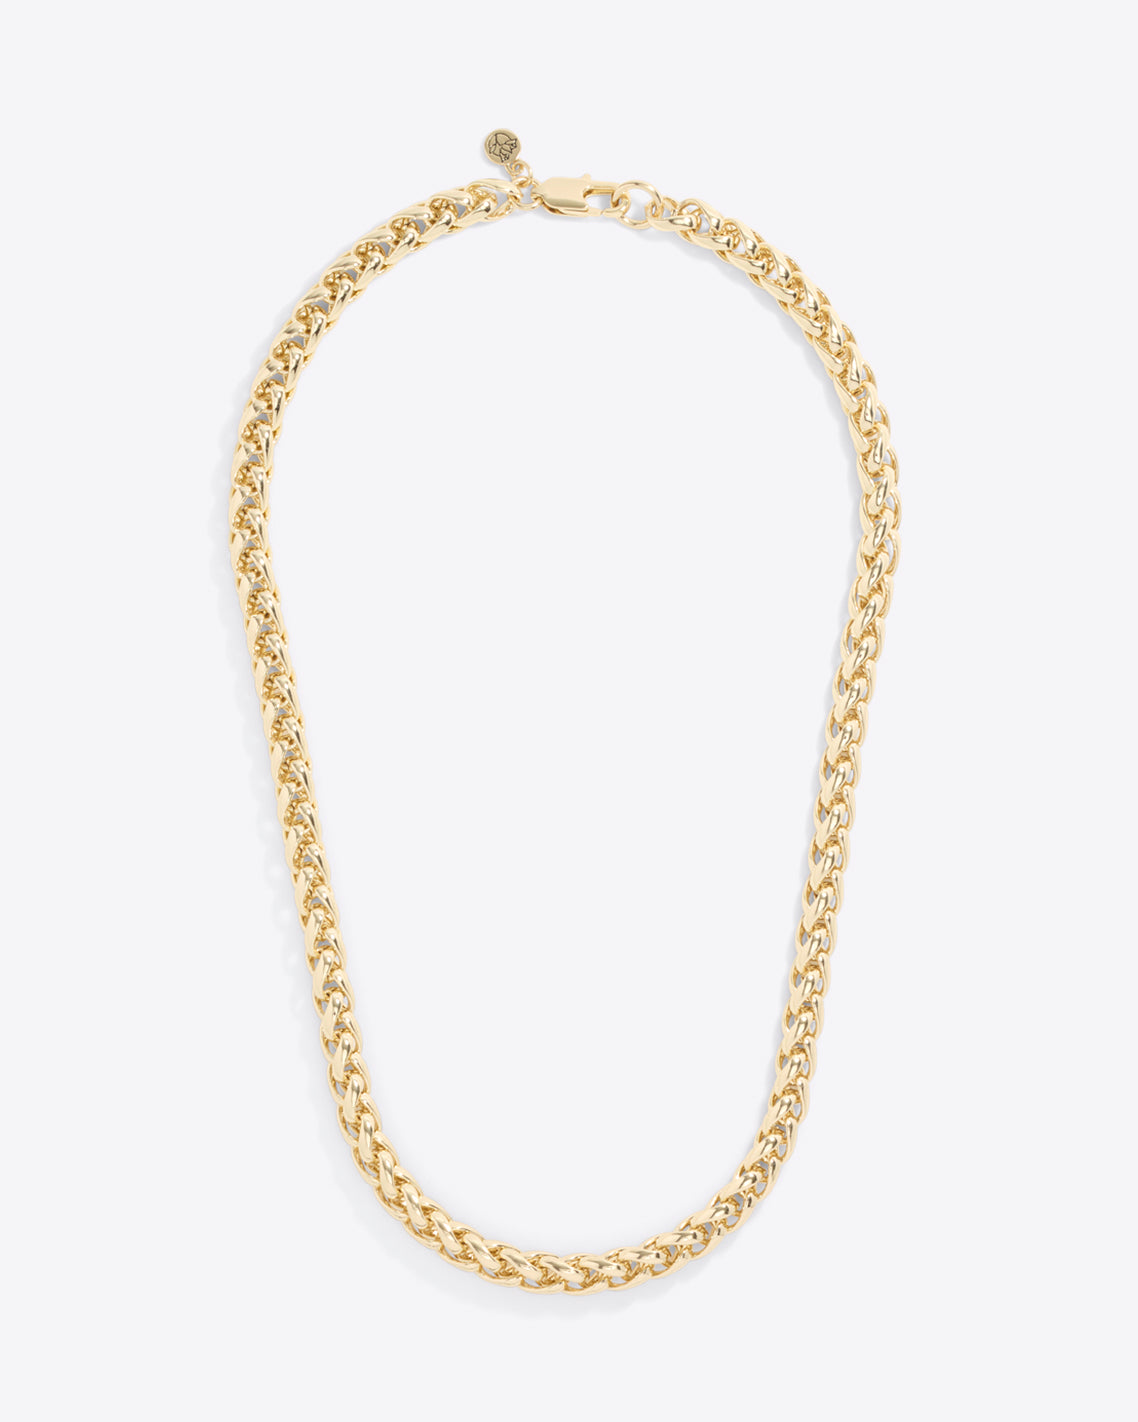 Woven Chain Necklace